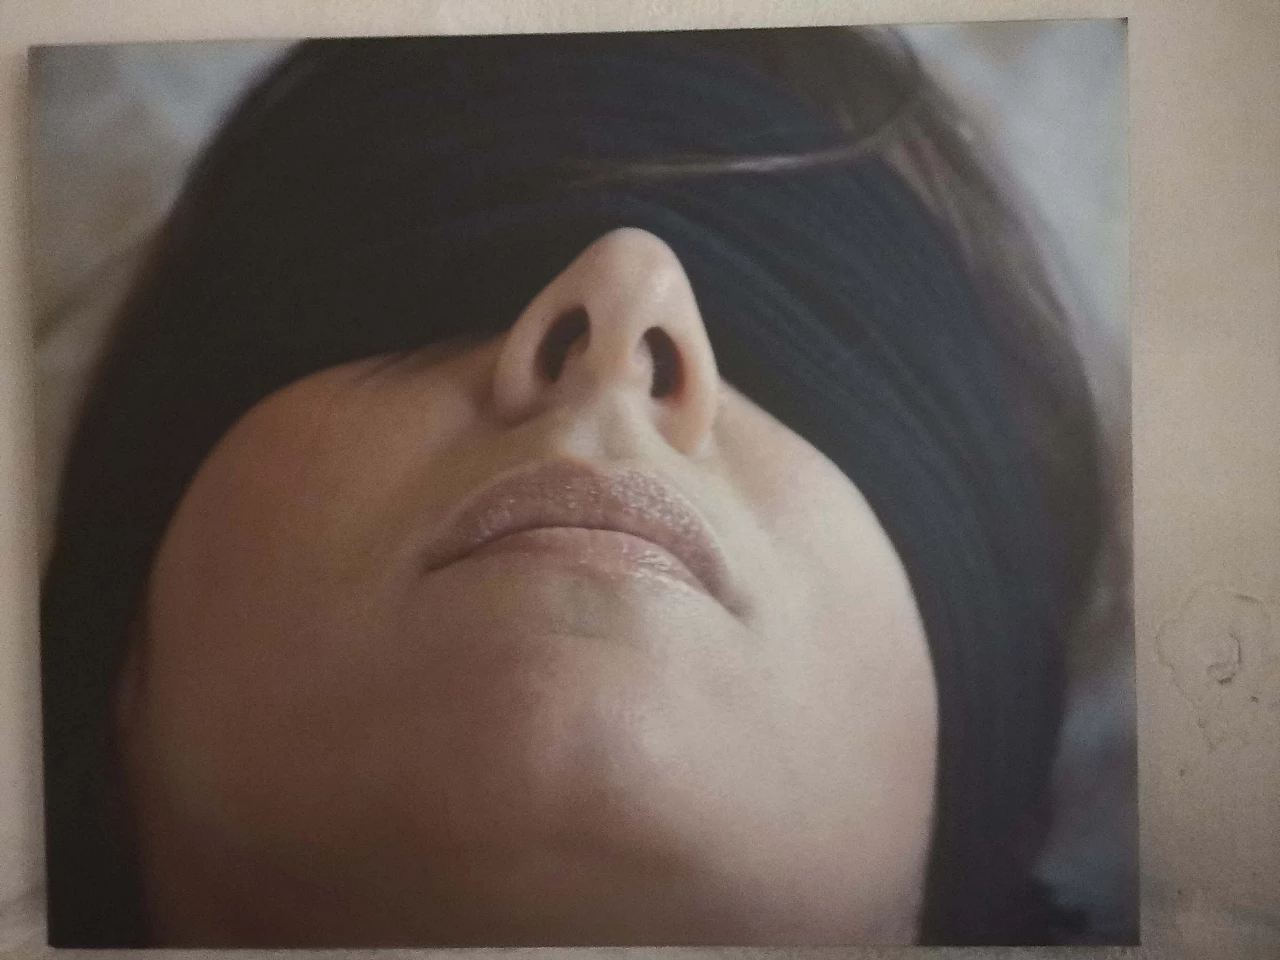 Photograph by P. Pazzi, Portrait of a blindfolded woman, 2000s. 1230216